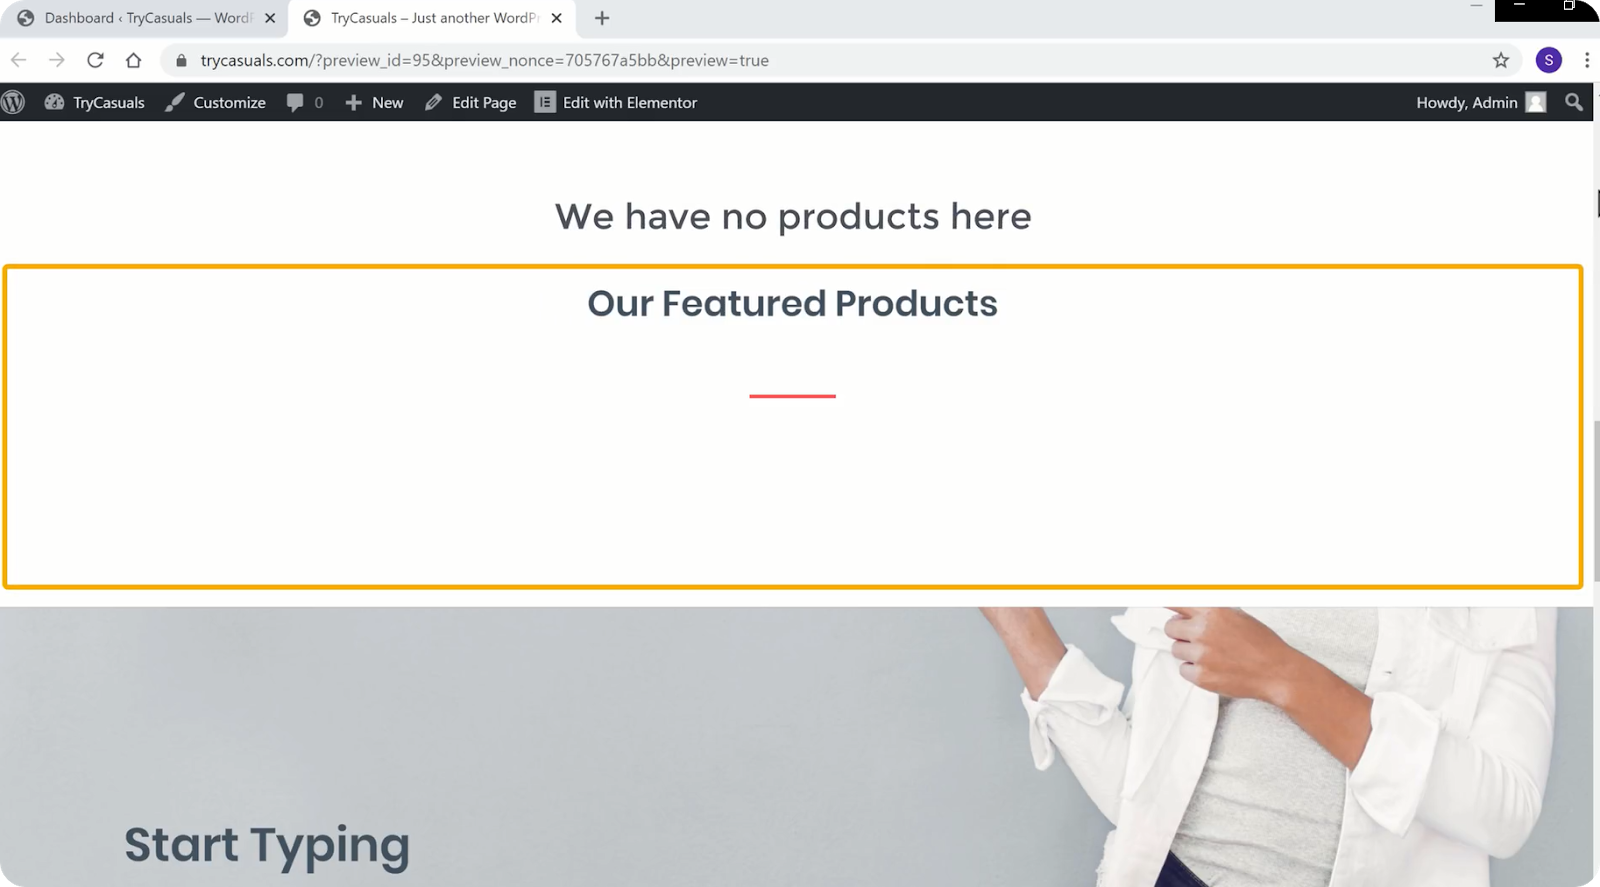 No products in the featured products section